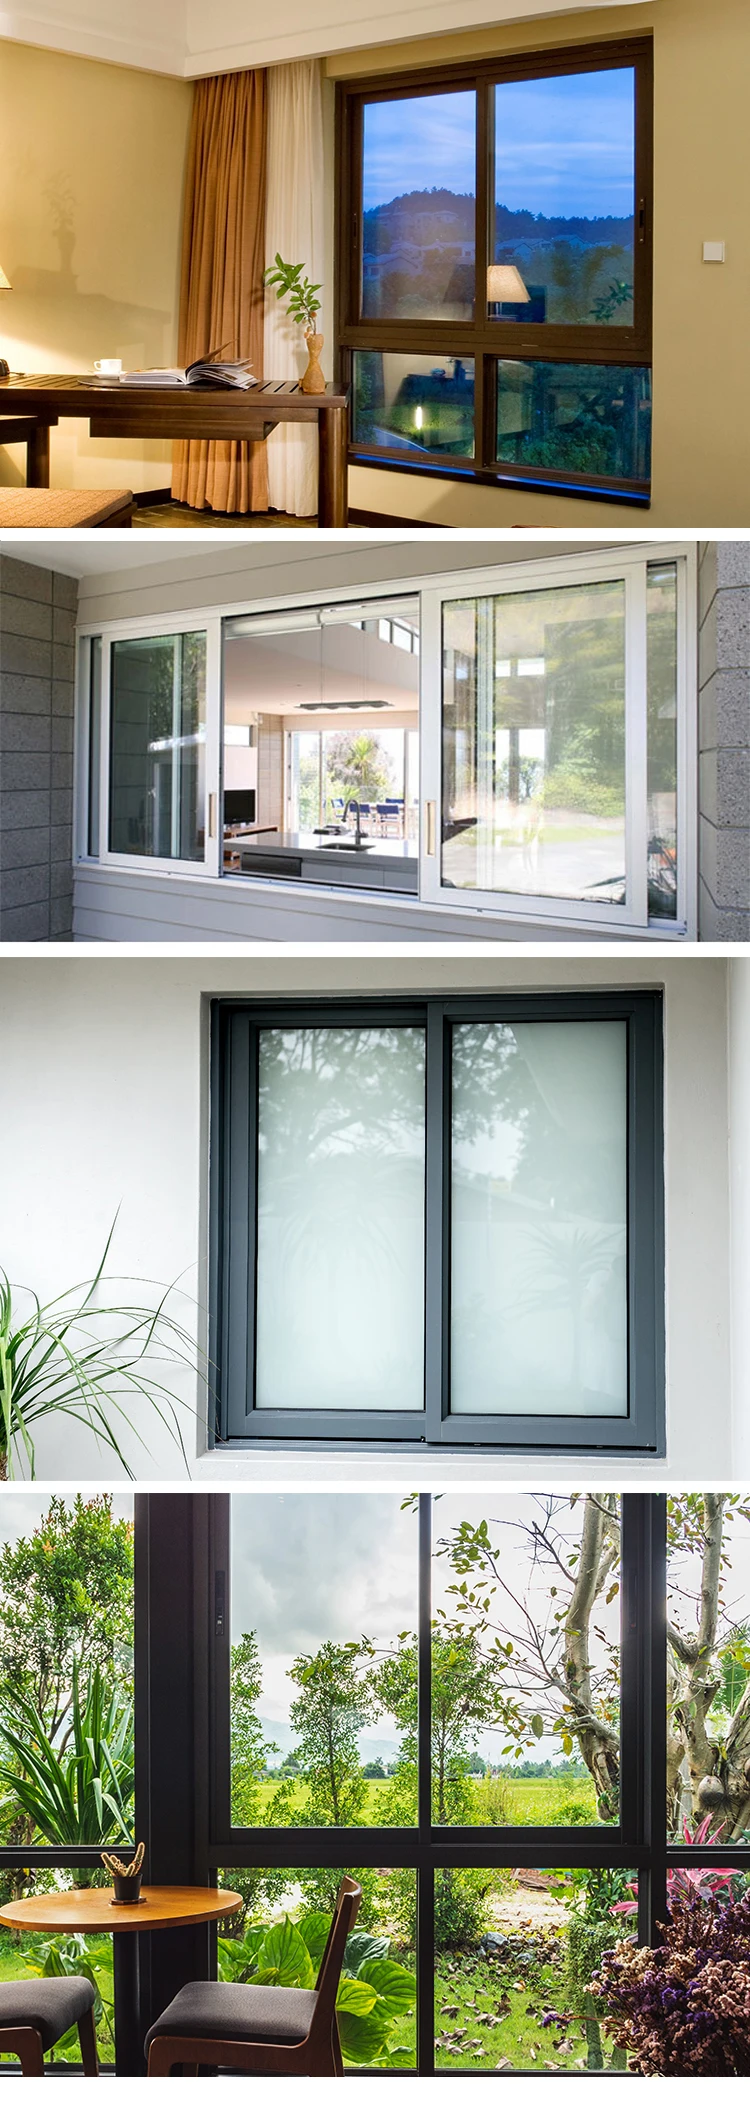 High Quality Double Glazed Tempered Glass custom made colors Sliding Windows for House